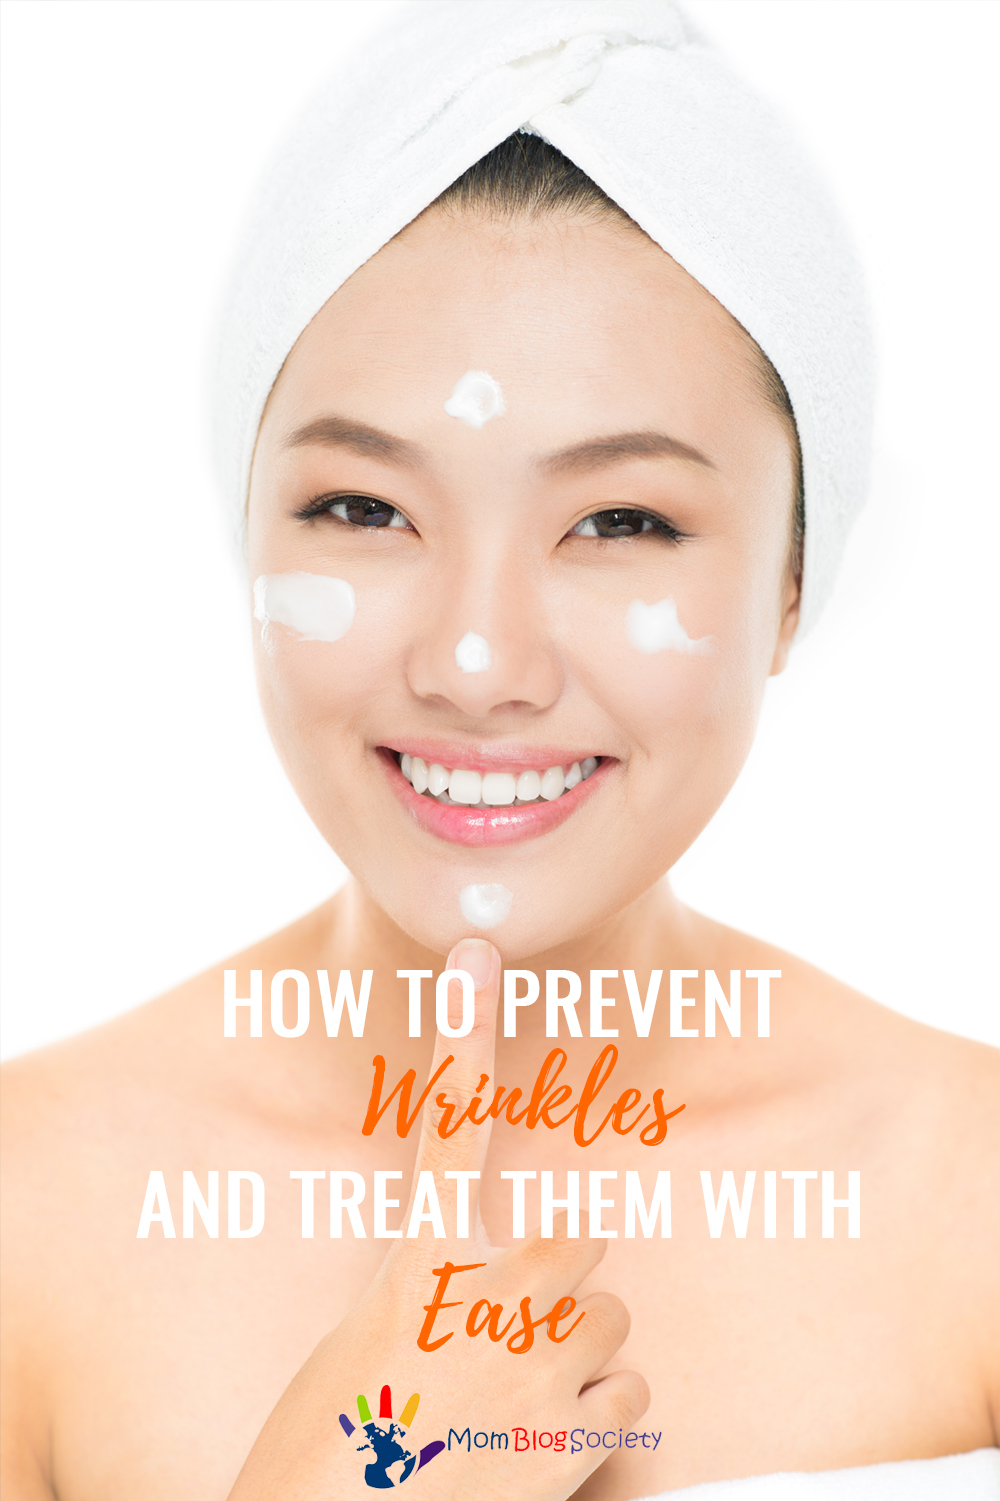 How to Prevent Wrinkles and Treat